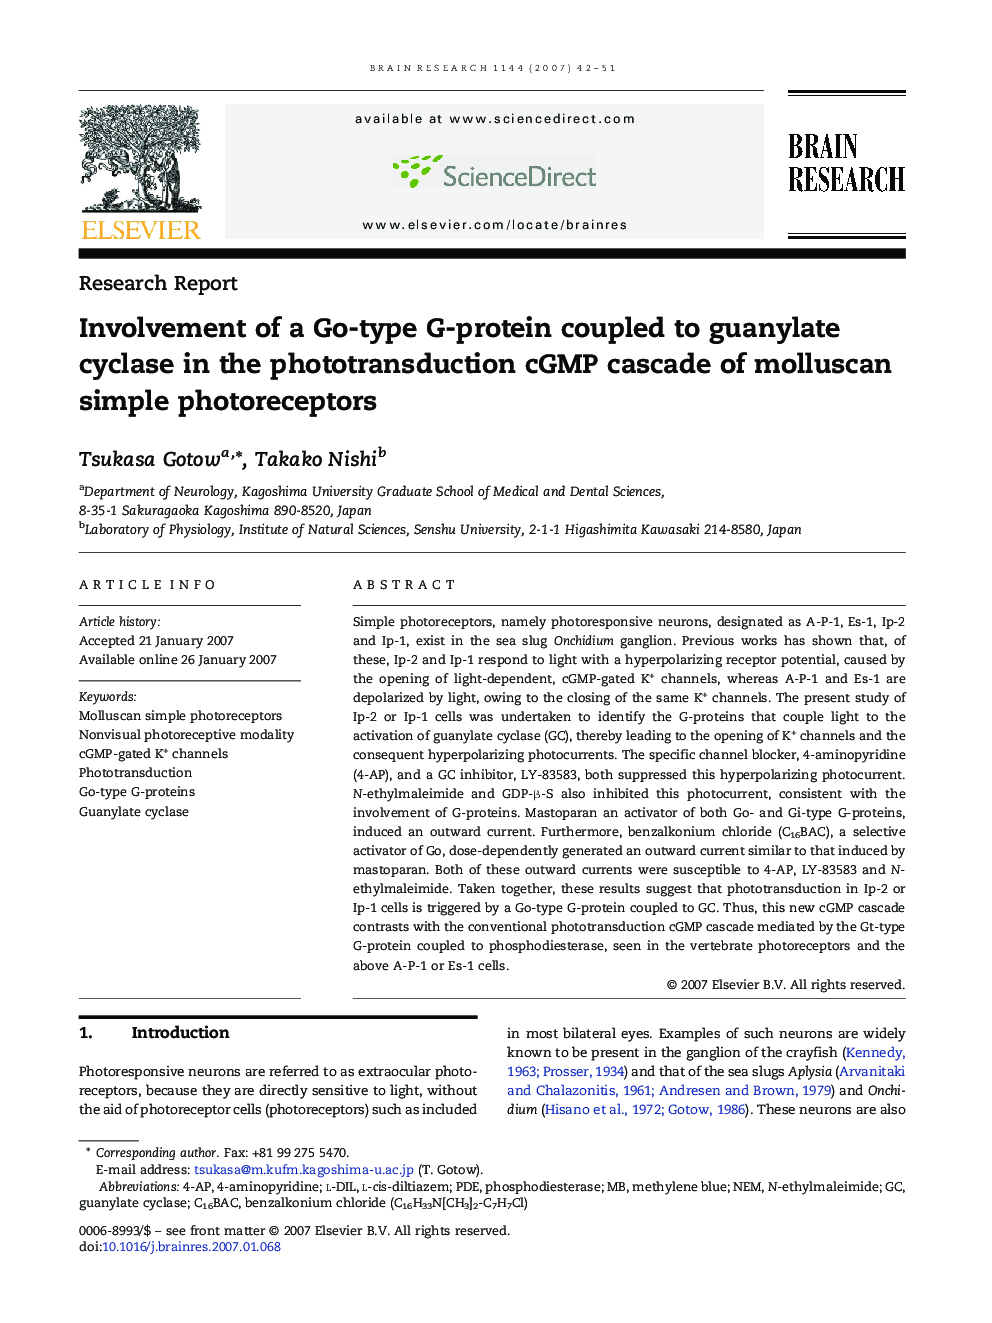 Involvement of a Go-type G-protein coupled to guanylate cyclase in the phototransduction cGMP cascade of molluscan simple photoreceptors